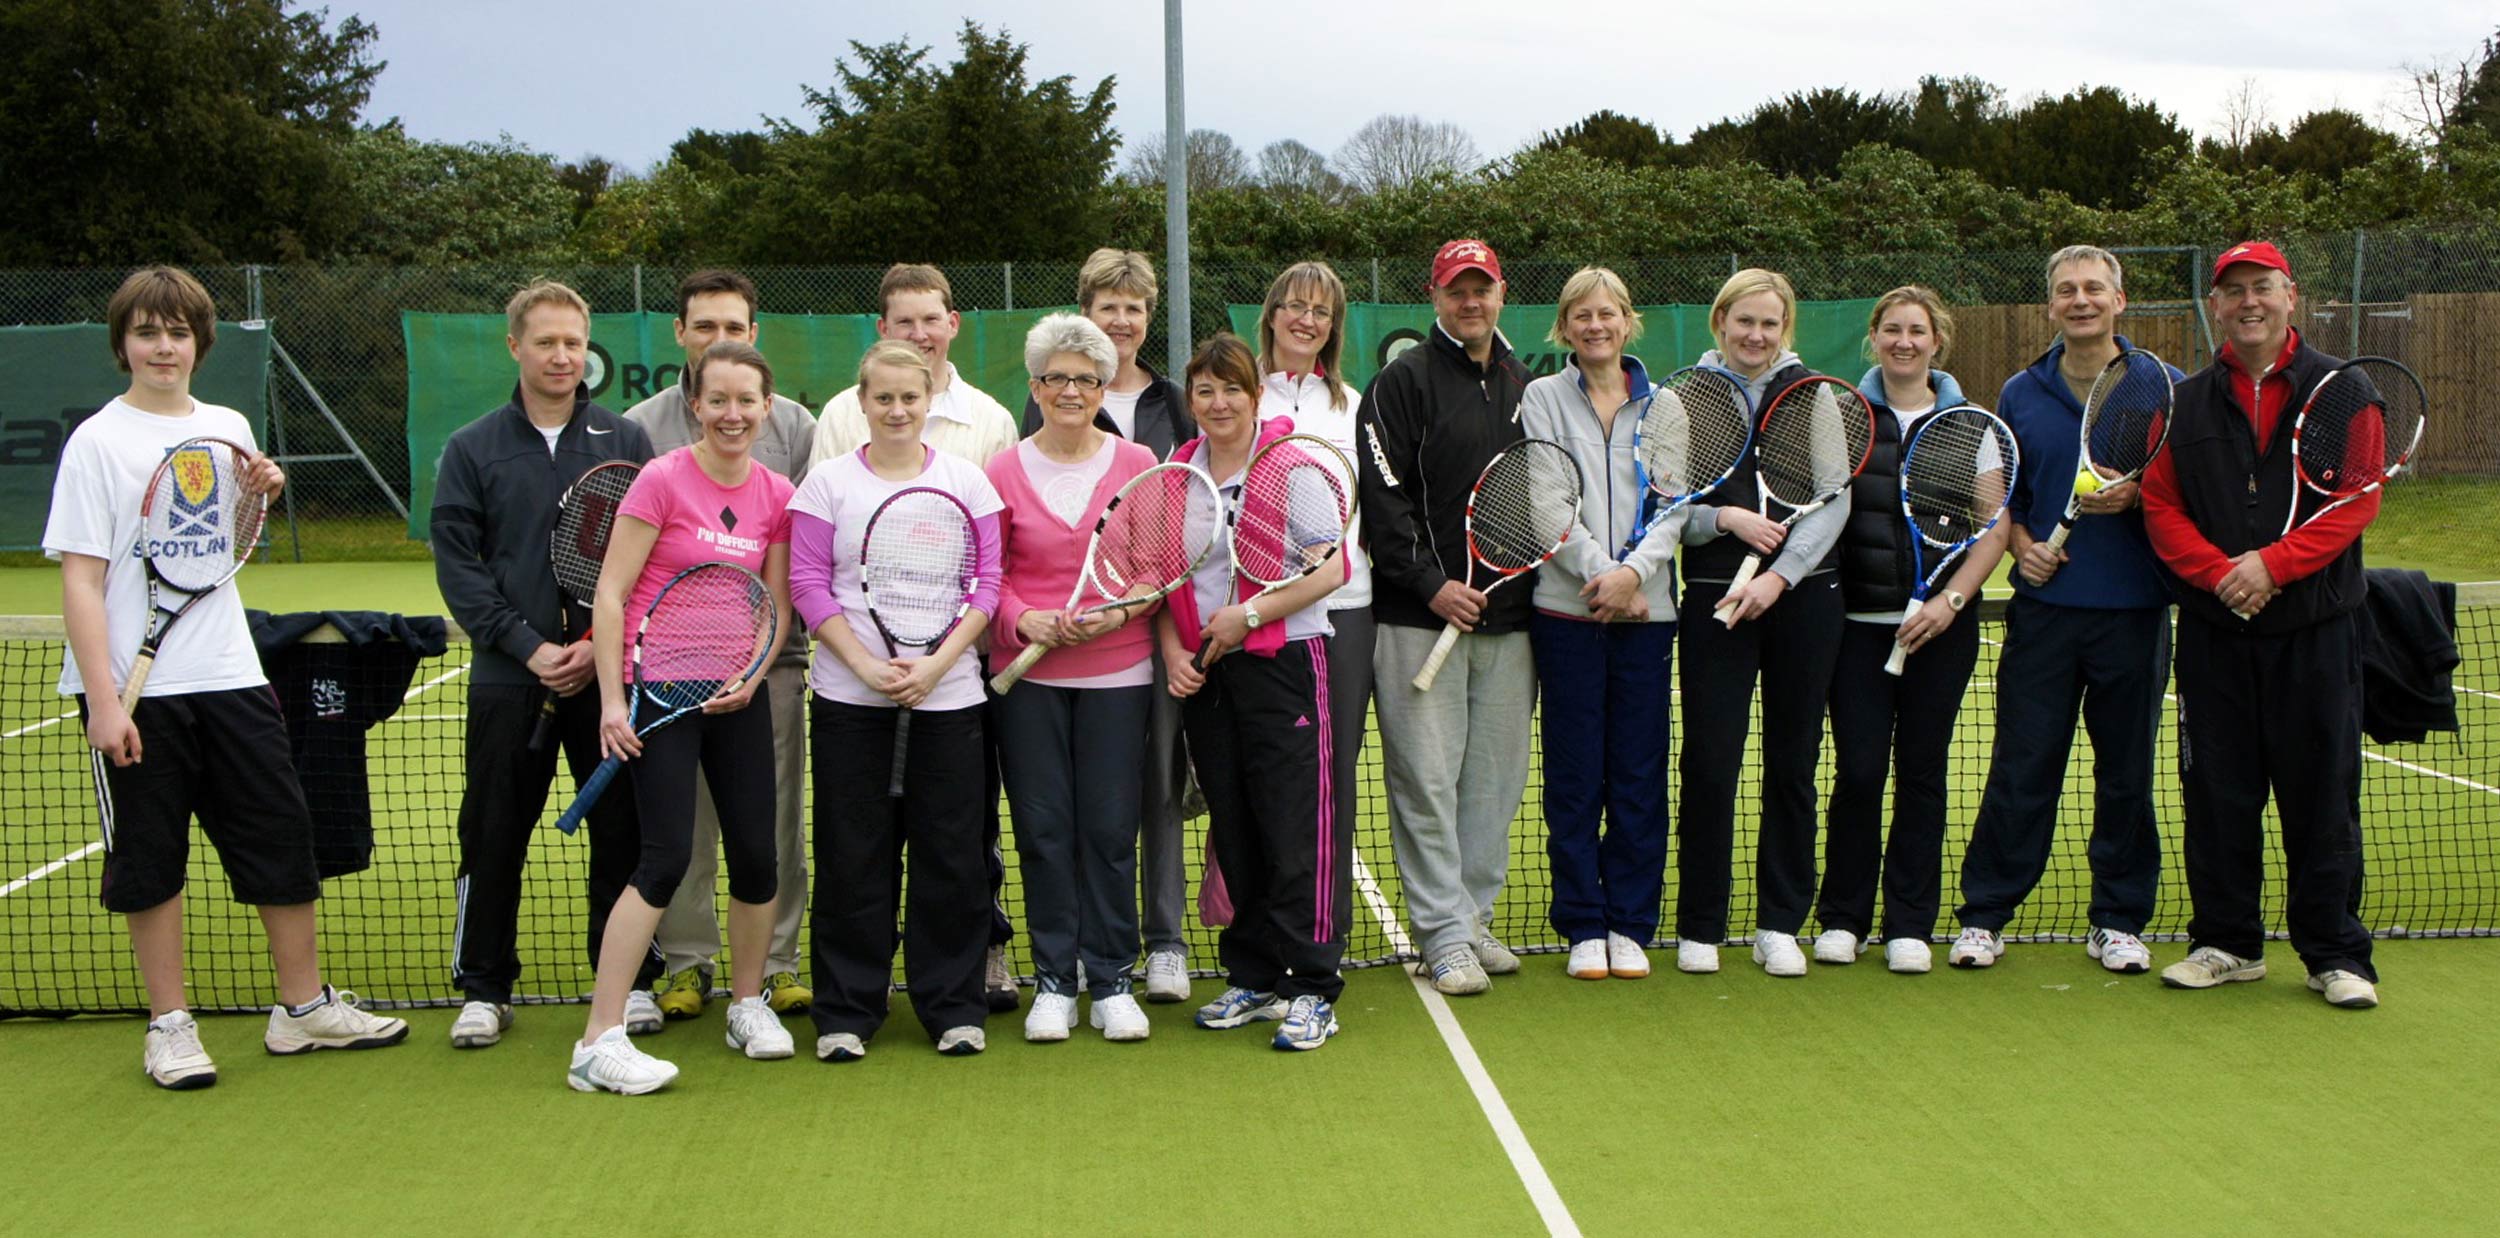 Rusty Rackets group on Halton's courts